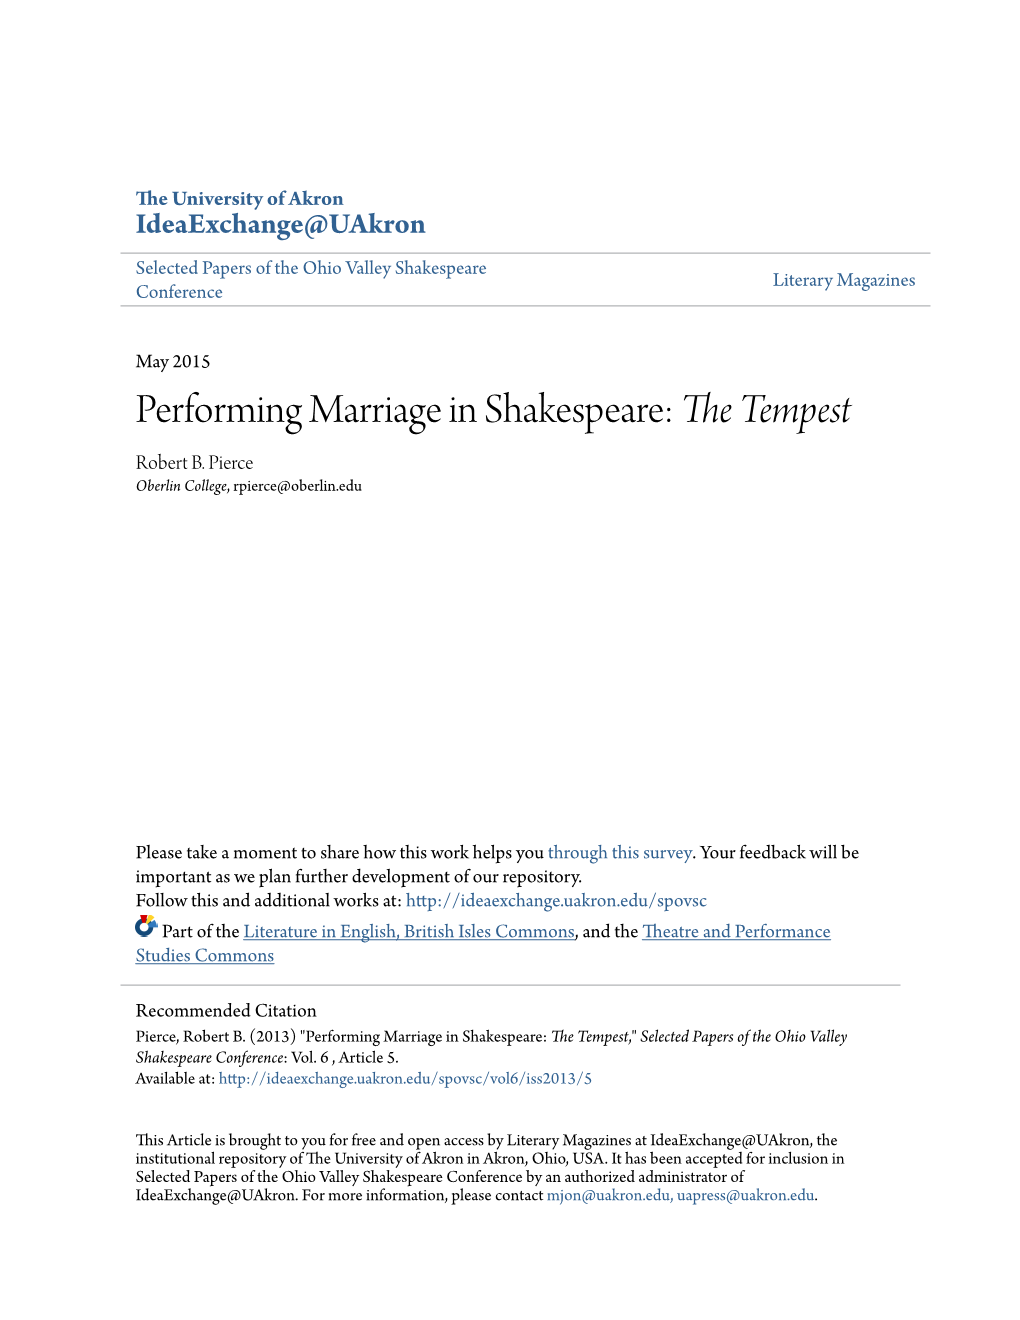 Performing Marriage in Shakespeare: &lt;I&gt;The Tempest&lt;/I&gt;